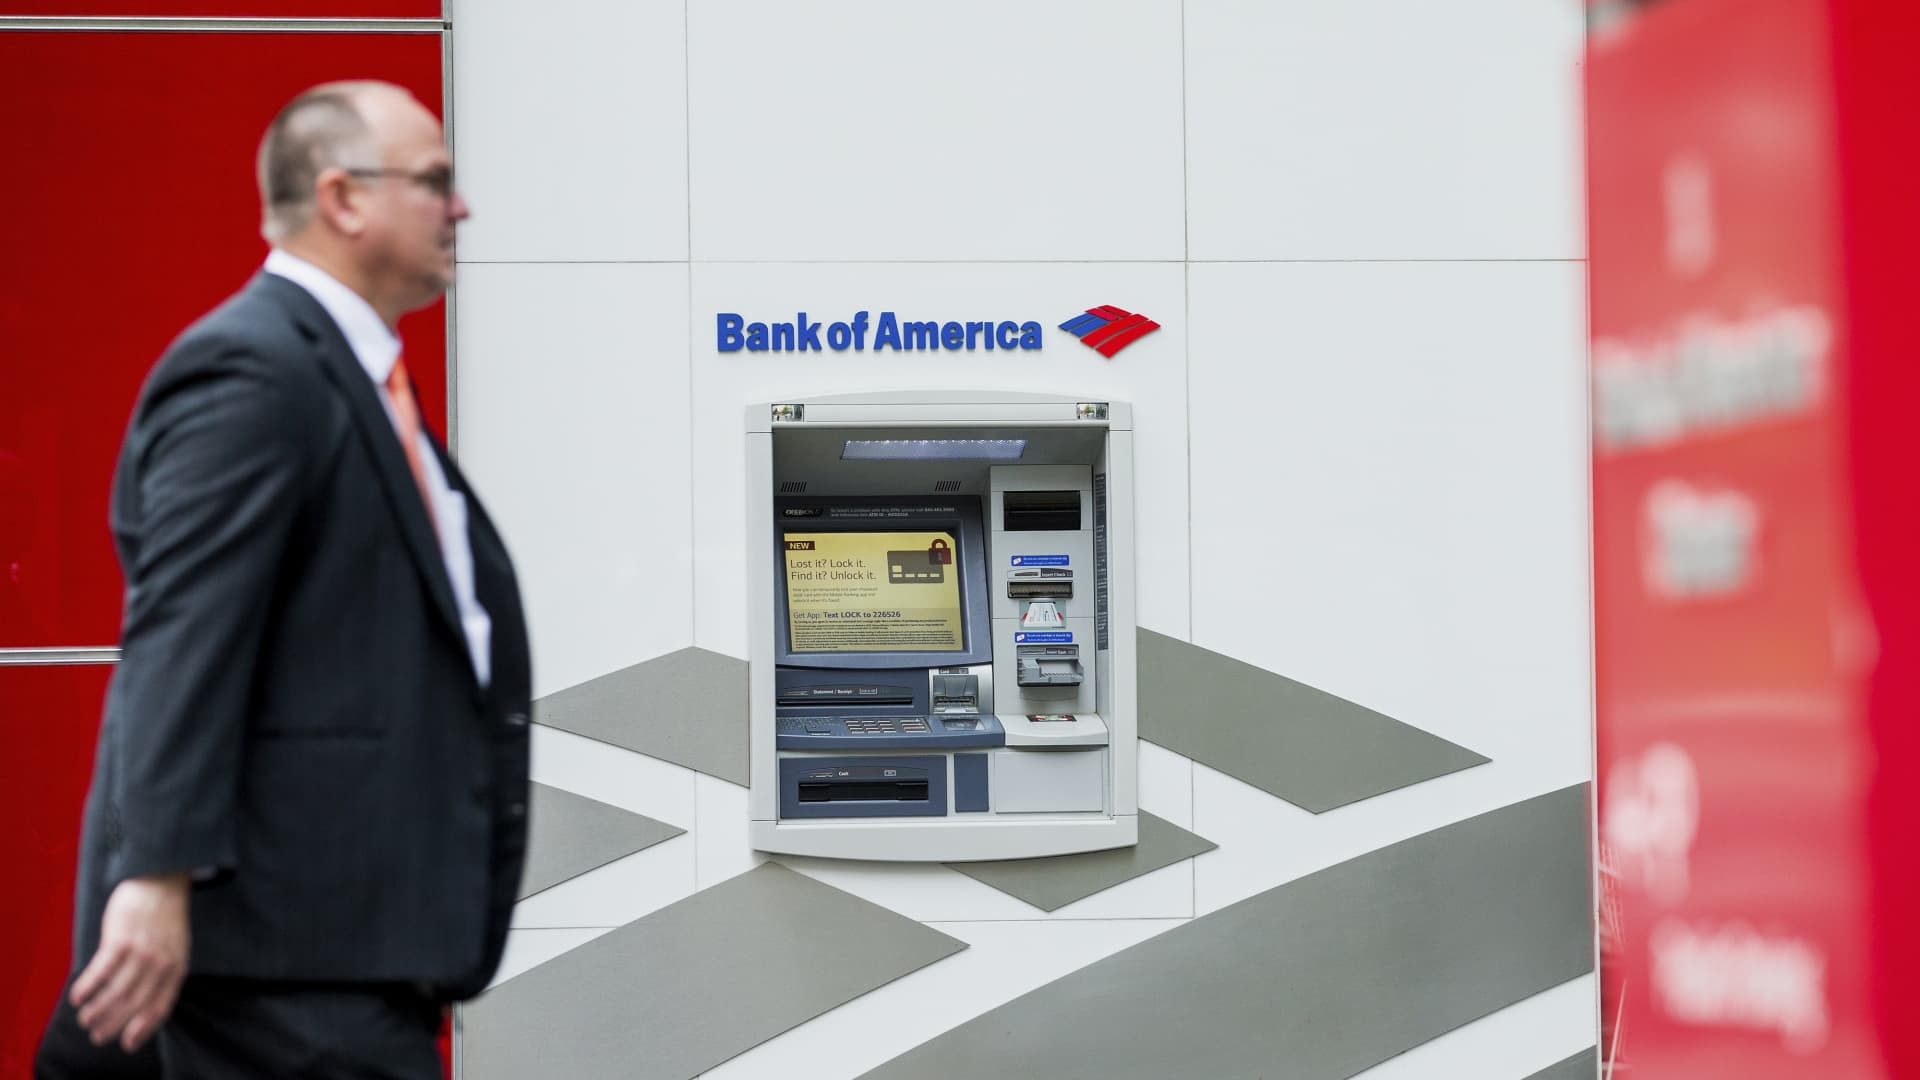 Bank of America fined for consumer abuses, fake accounts, bogus fees